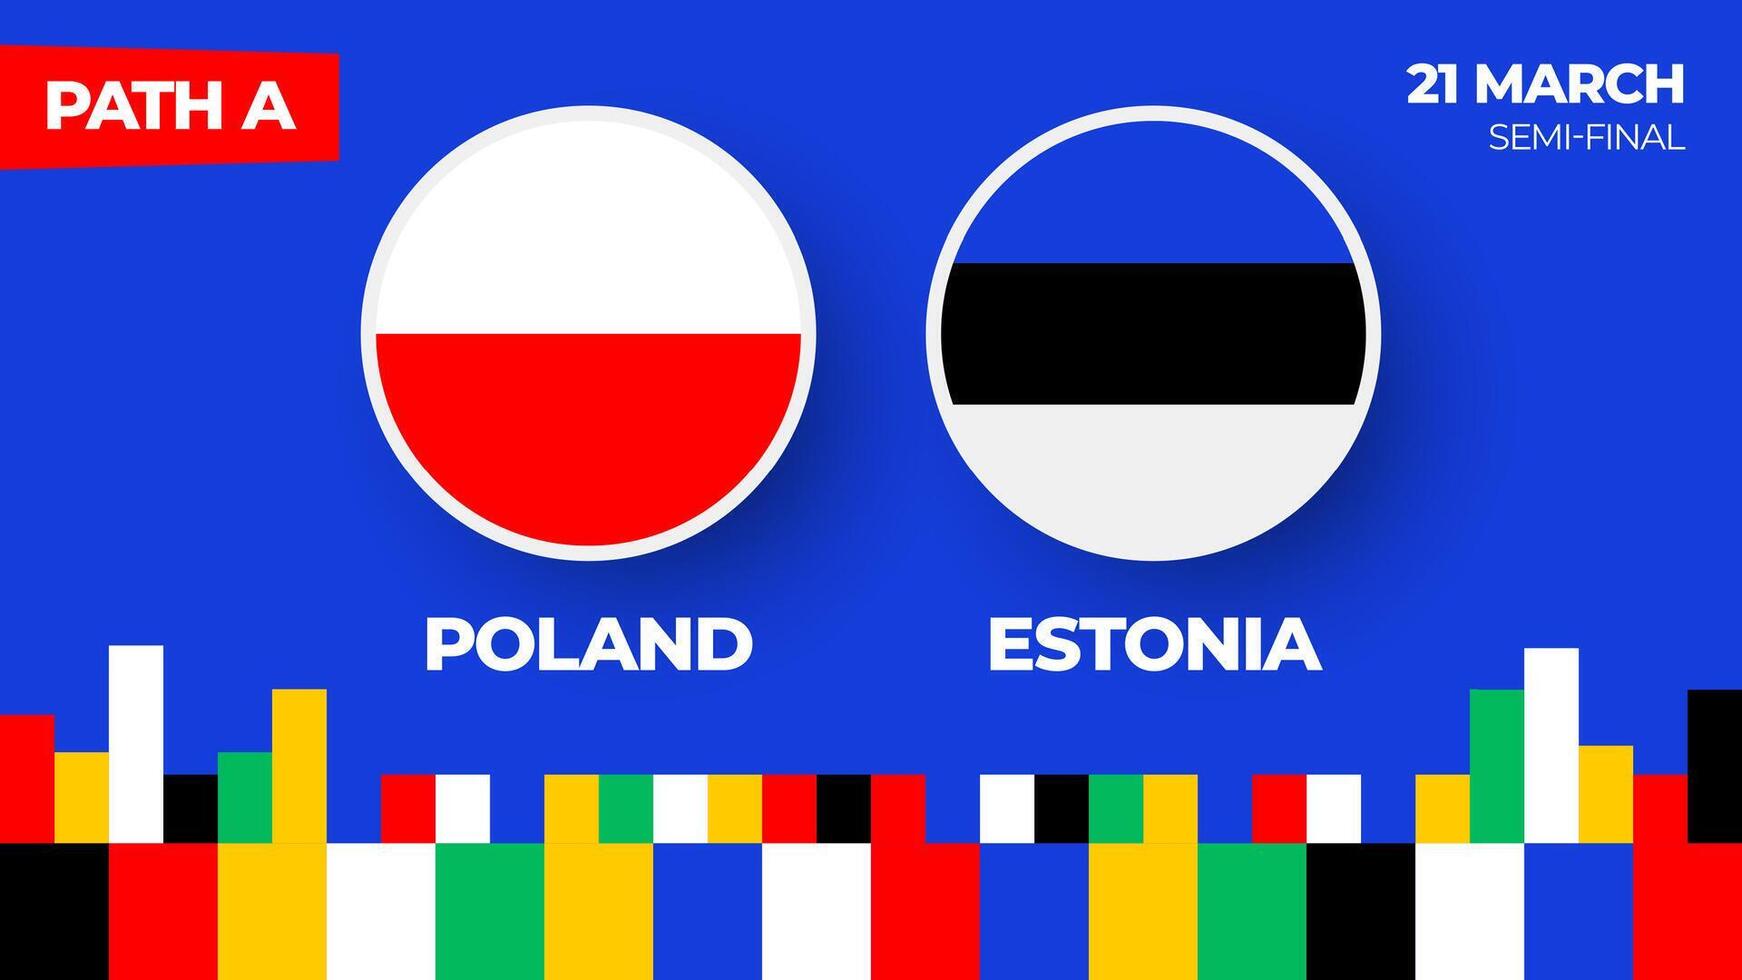 Poland vs Estonia football 2024 match. Football 2024 playoff championship match versus teams intro sport background, championship competition final poster, flat style vector illustration